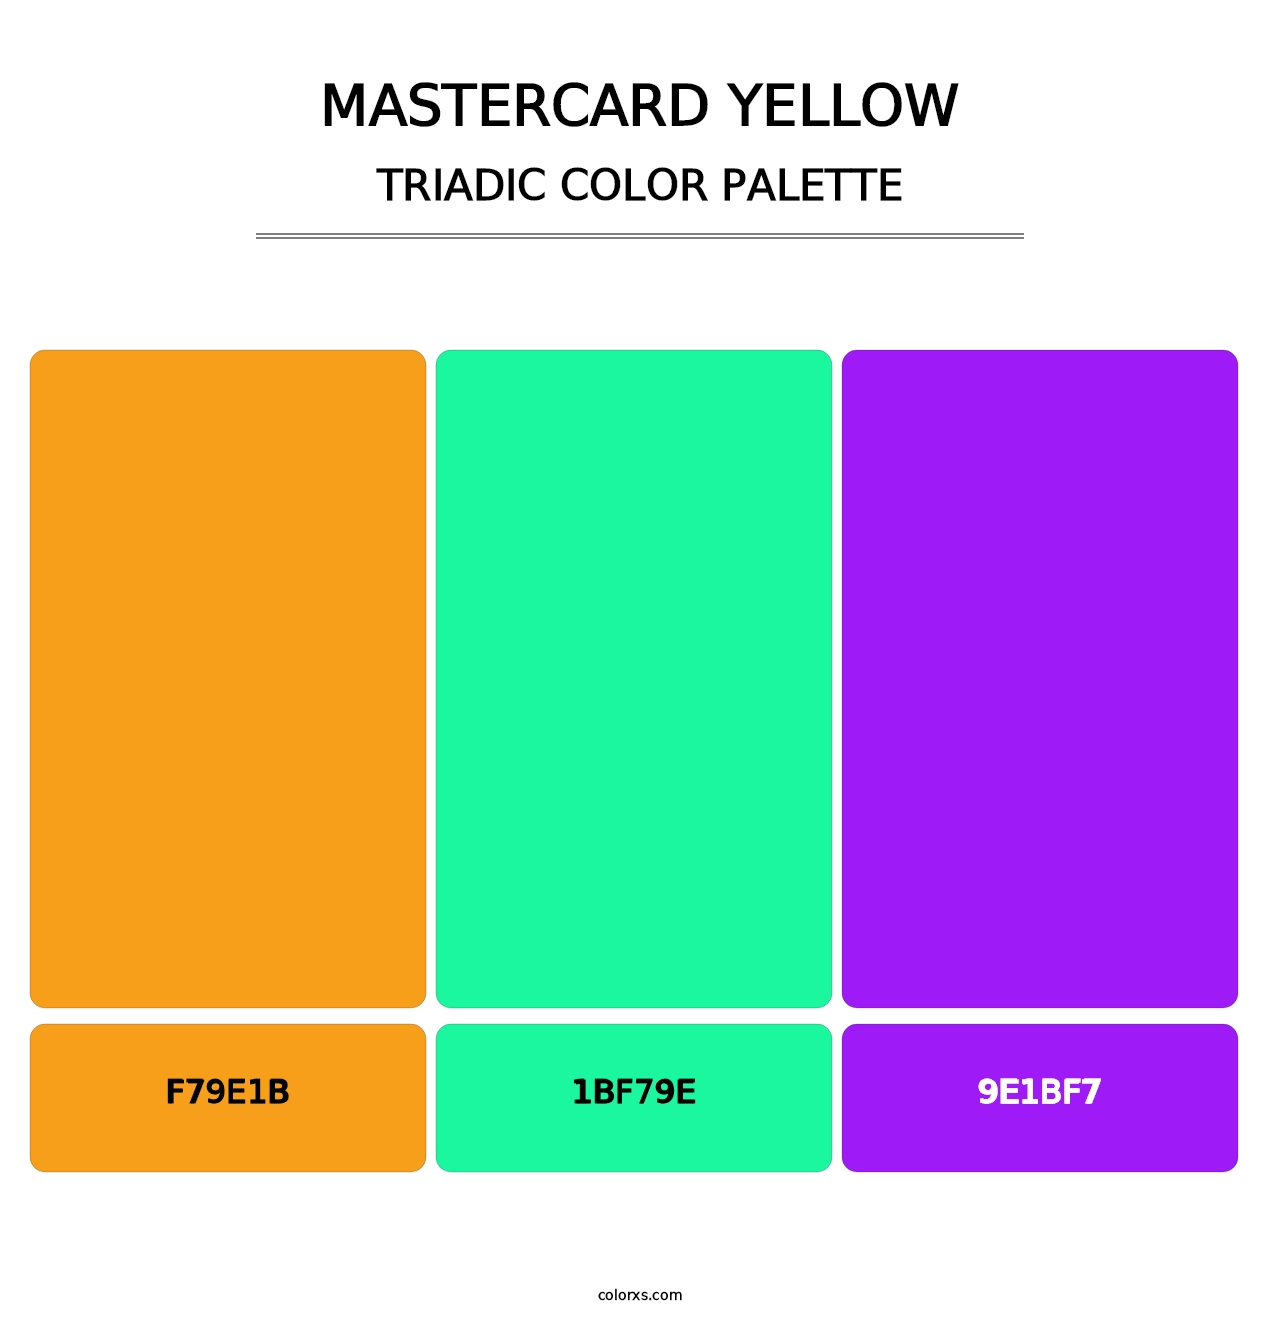 Mastercard Yellow - Triadic Color Palette